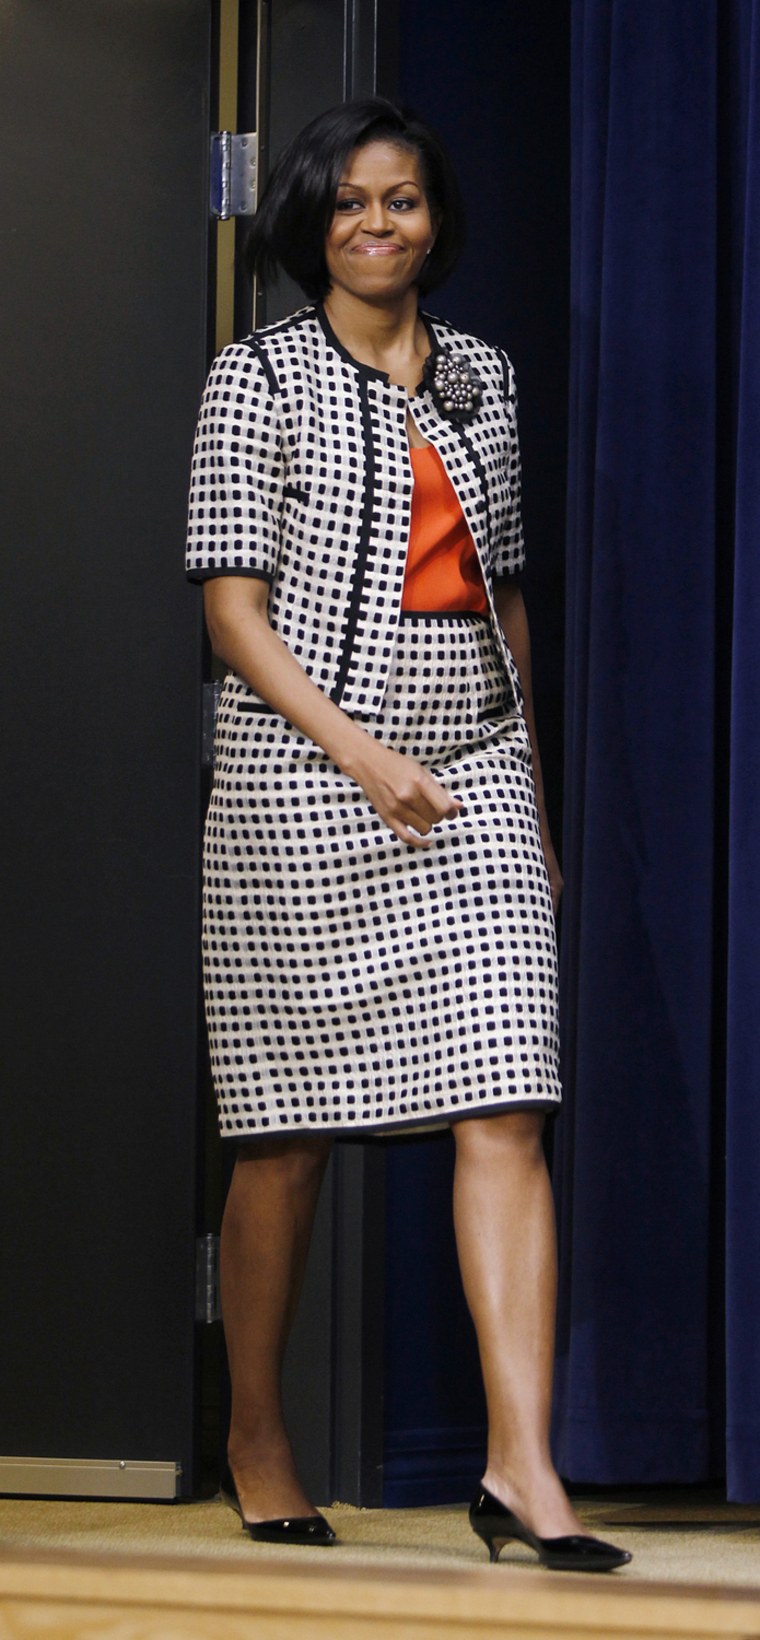 Image: U.S. first lady Michelle Obama arrives to speak at the White House Council on Women and Girls' Forum on Workplace Flexibility in Washington